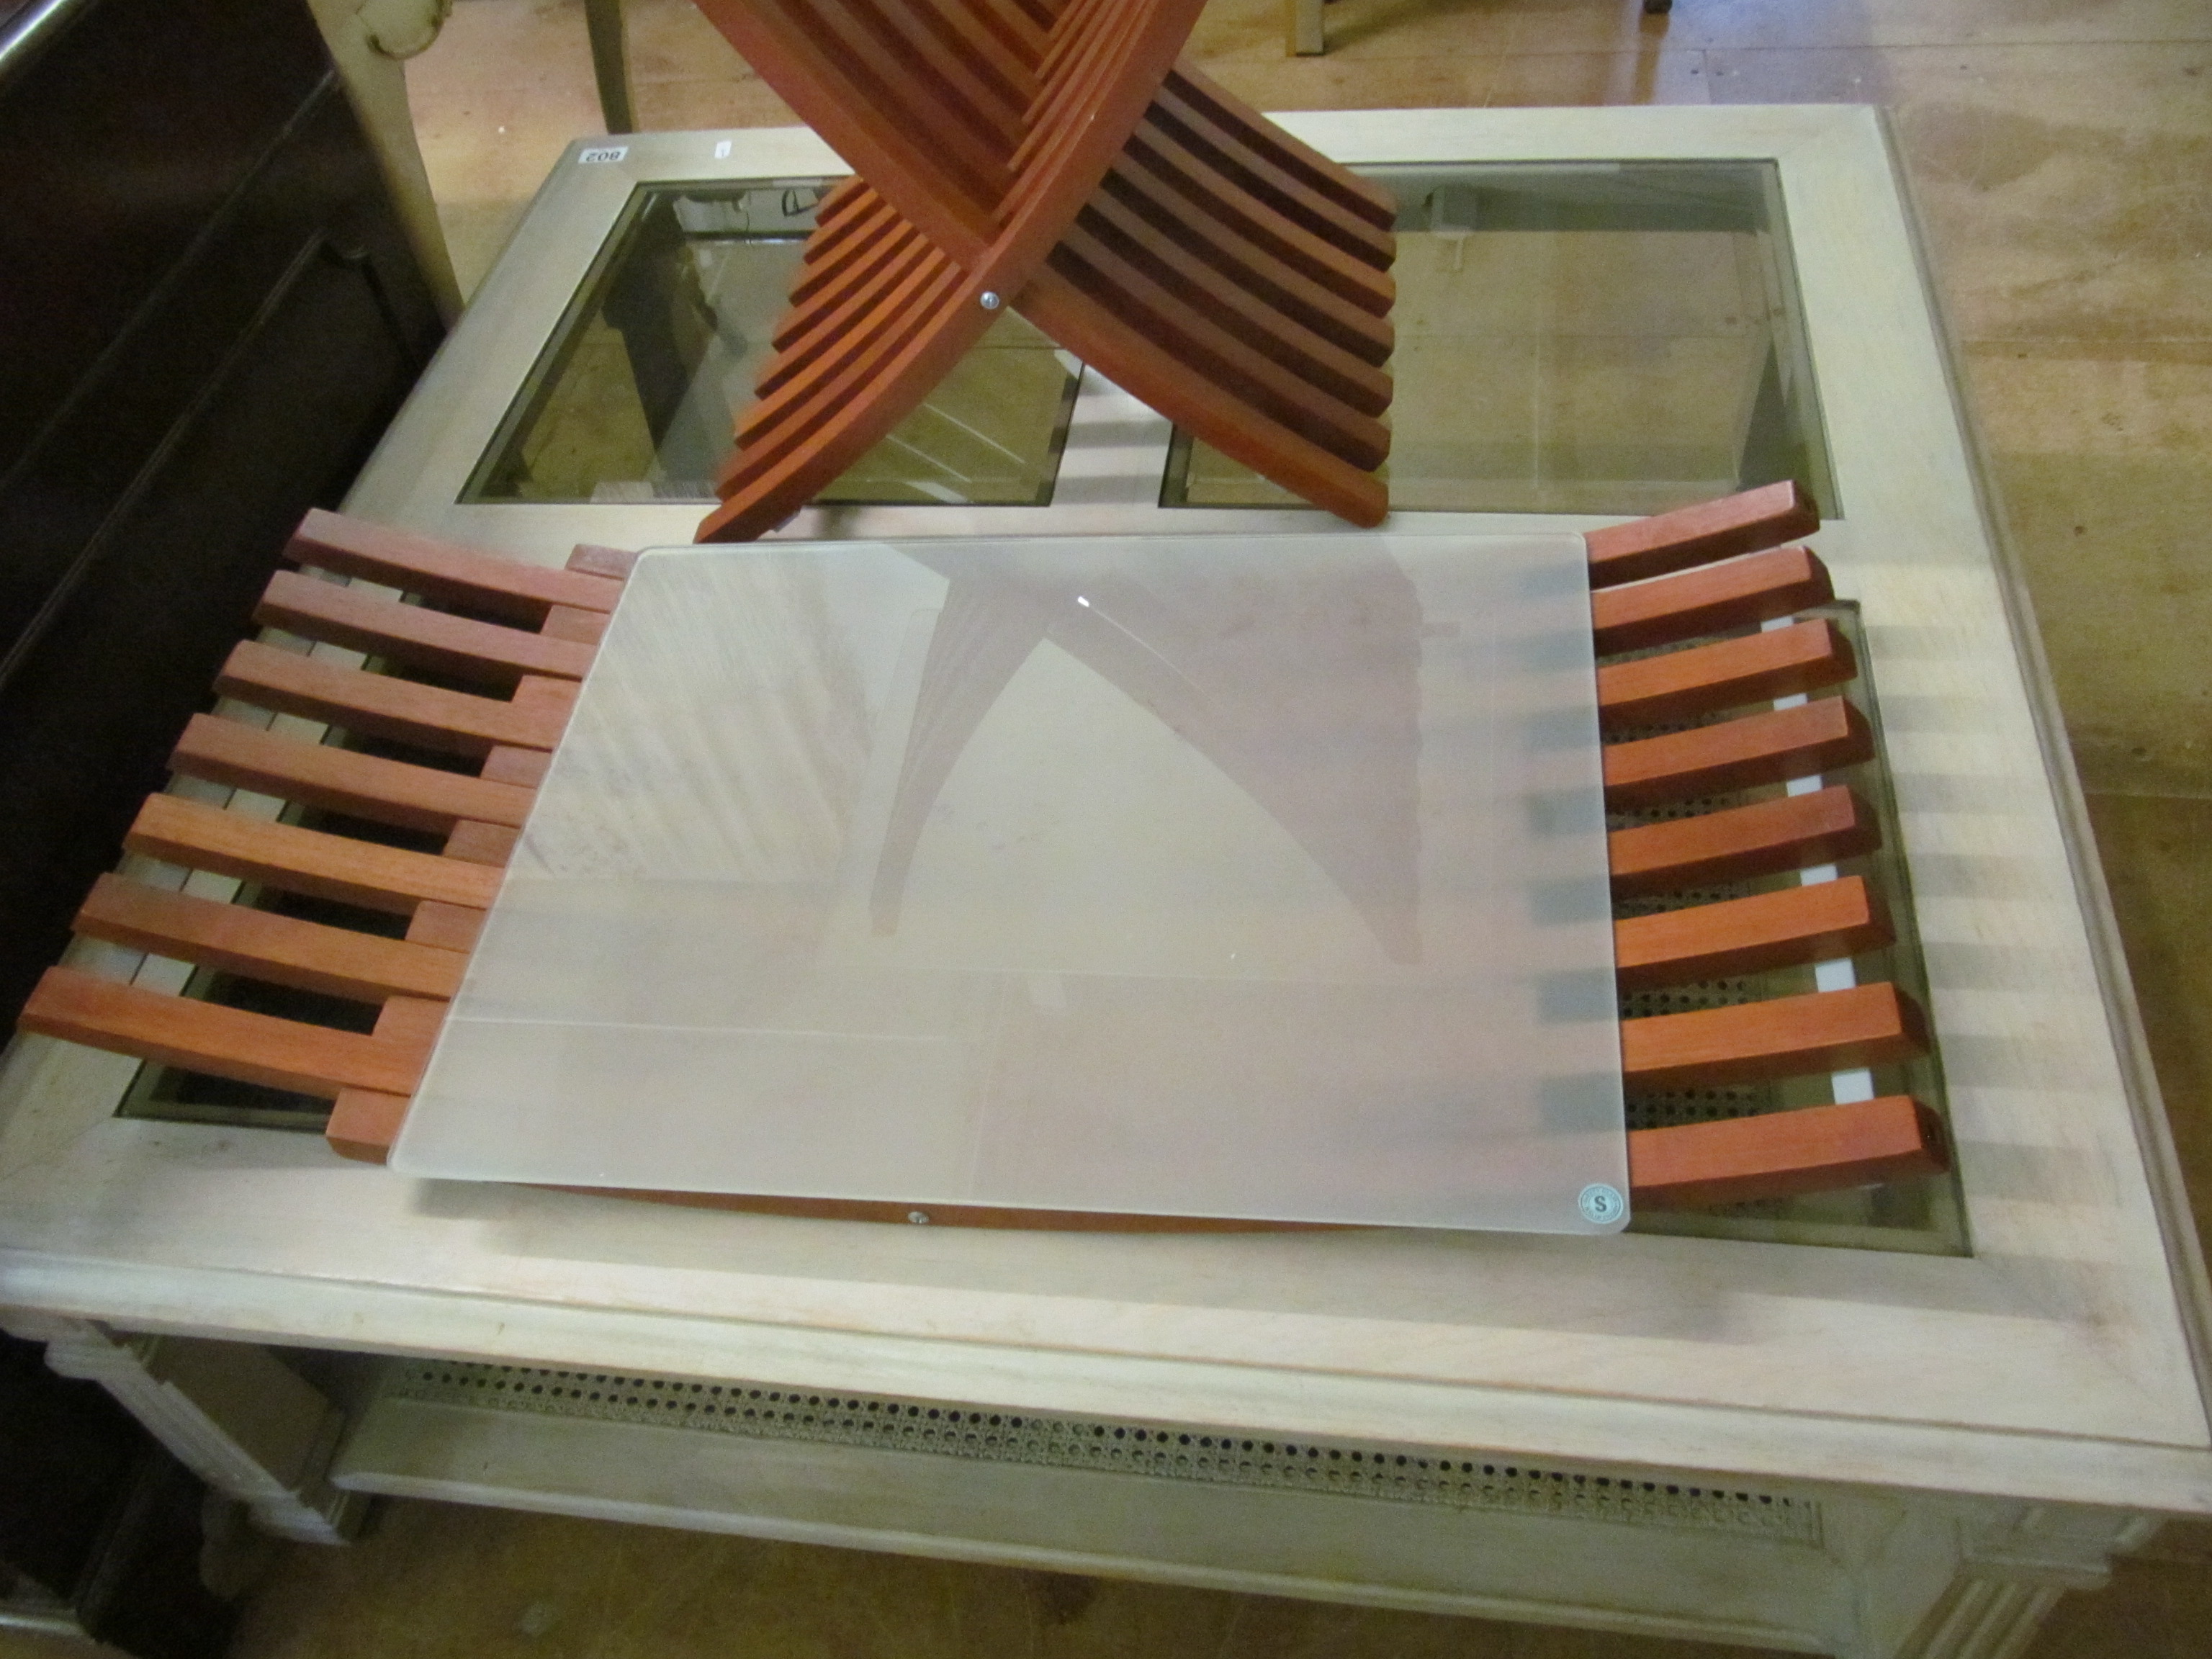 A pair of 'U' shaped slatted side tables with glass tops - Image 2 of 2